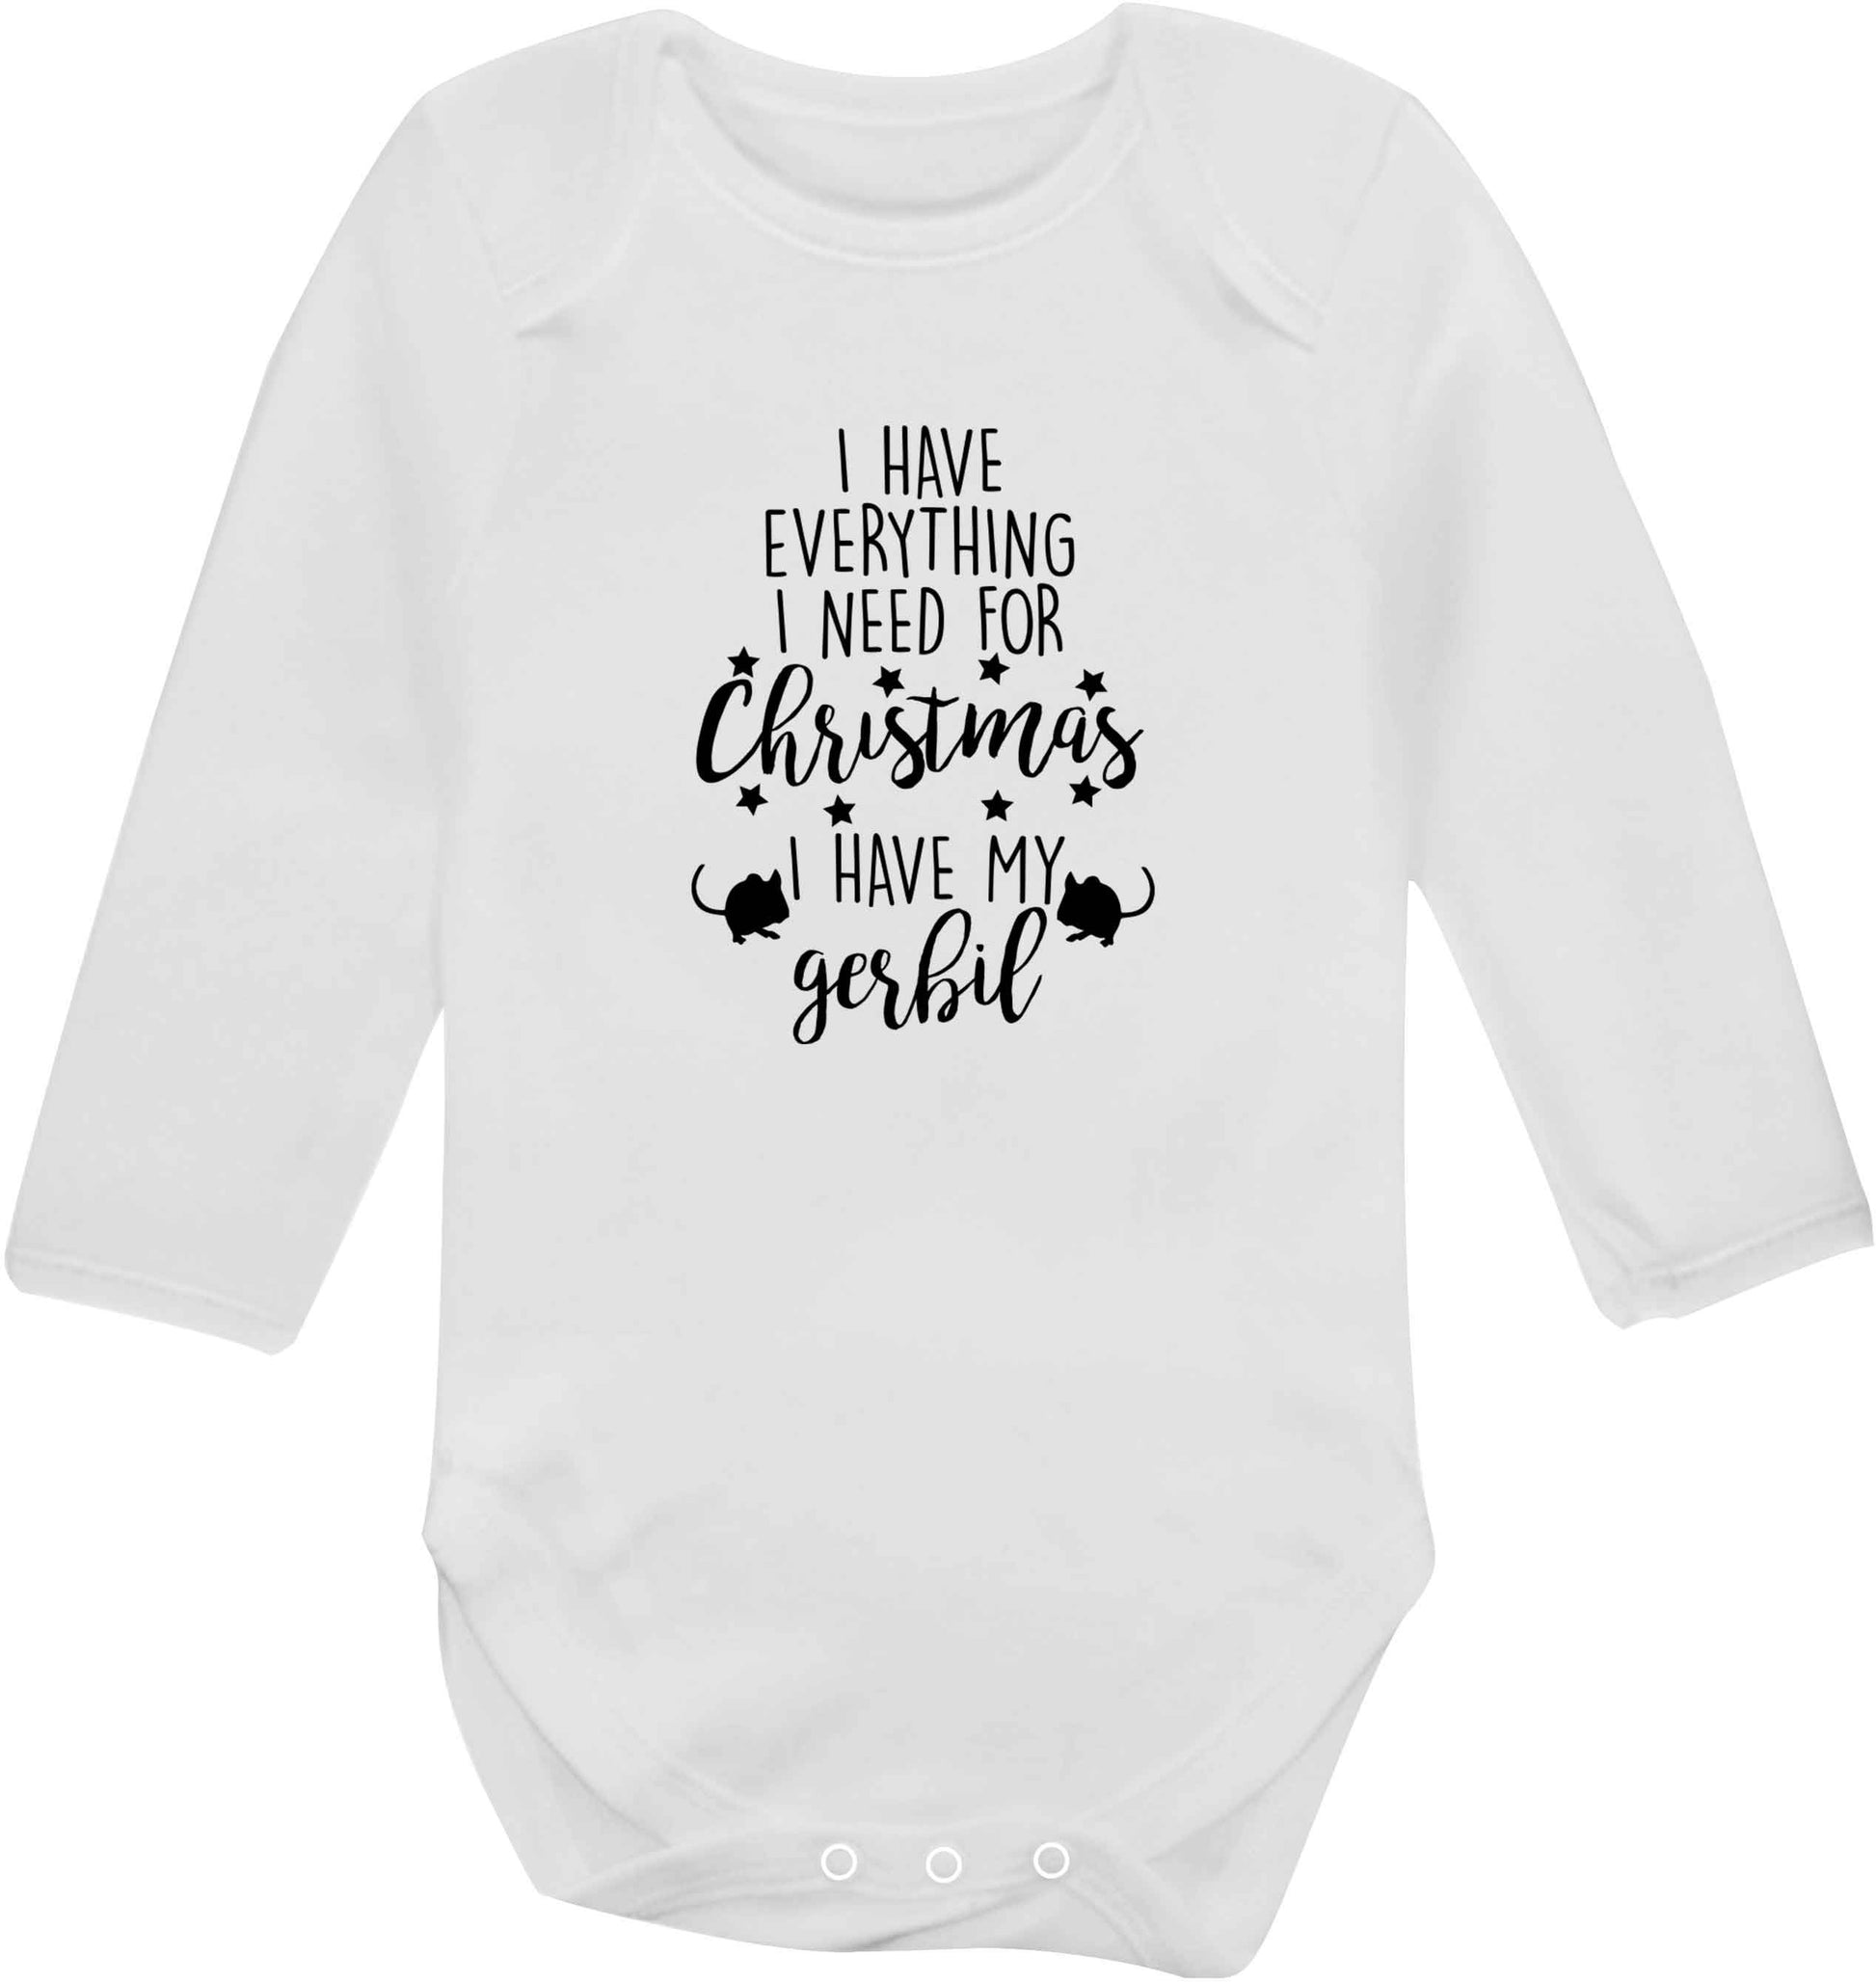 I have everything I need for Christmas I have my gerbil baby vest long sleeved white 6-12 months